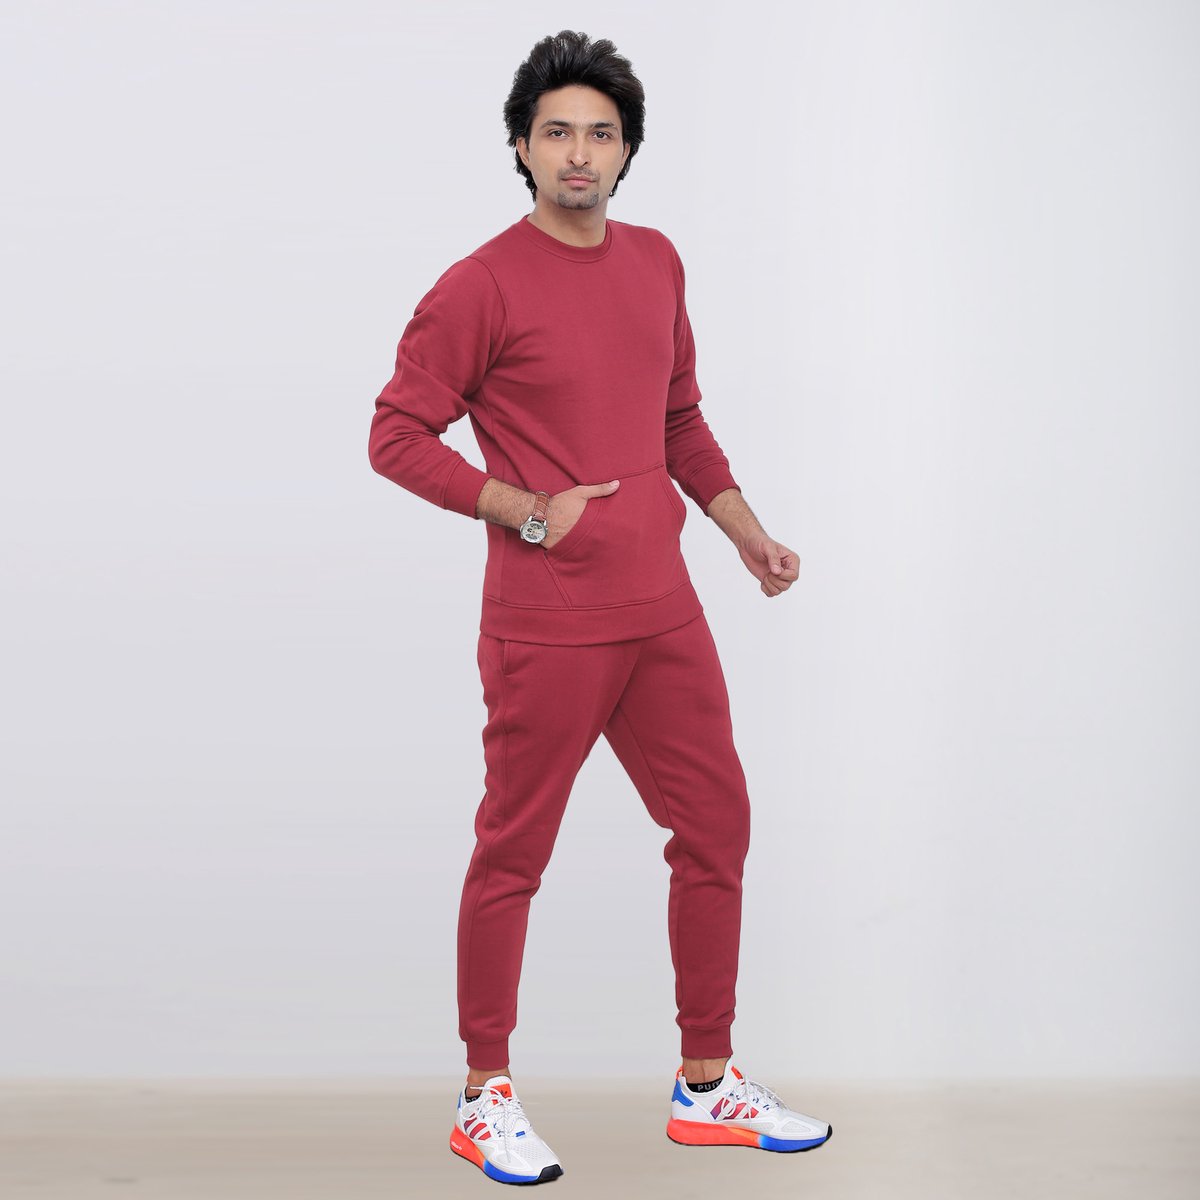 ICONICX Mens Plain Tracksuit Fleece Pullover Sweatshirt with Trousers Cotton Jogging Suit Exercise, Fitness, Boxing MMA, Maroon